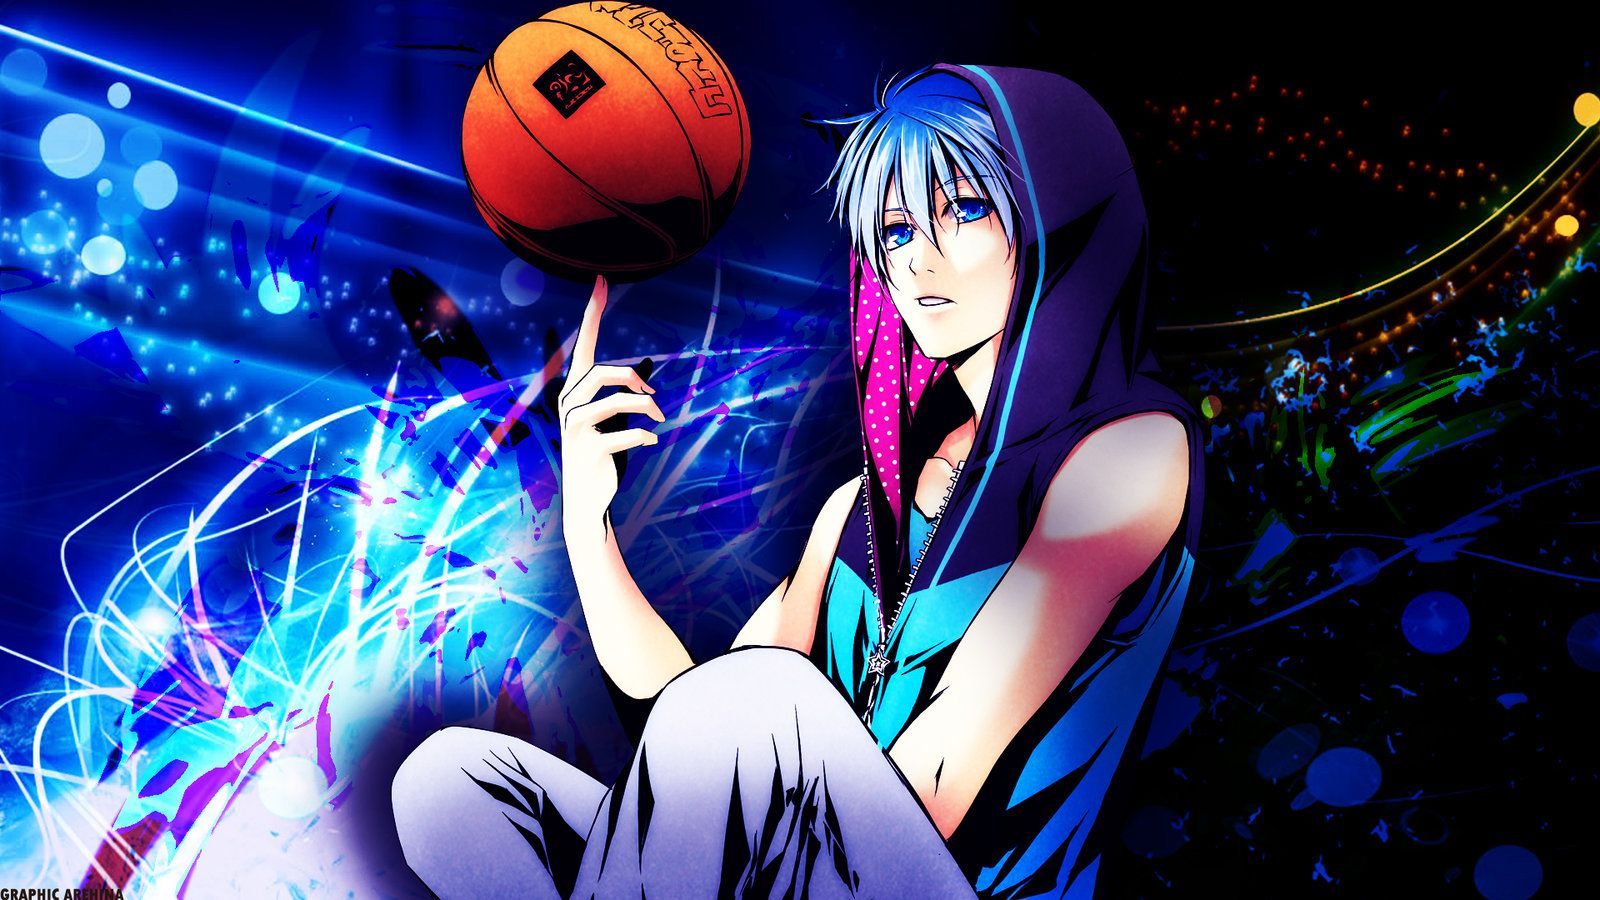 Top 10 Basketball Anime 2022 For All The Sports Enthusiasts